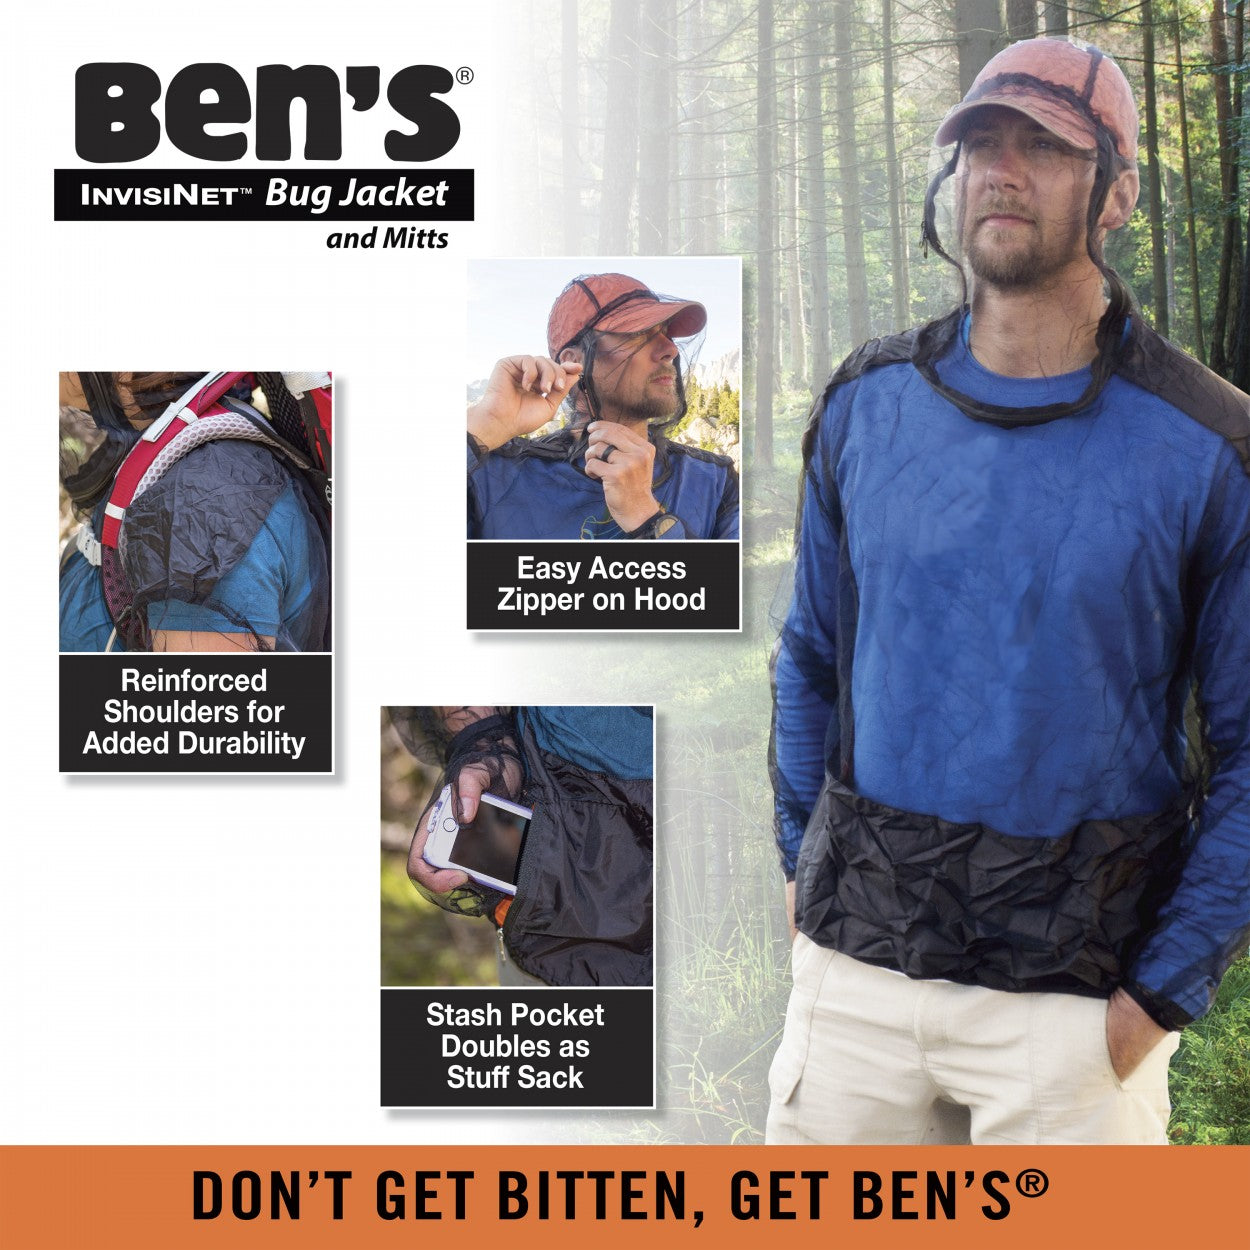 Bens invisinet bug jacket shown being worn by outdoor person